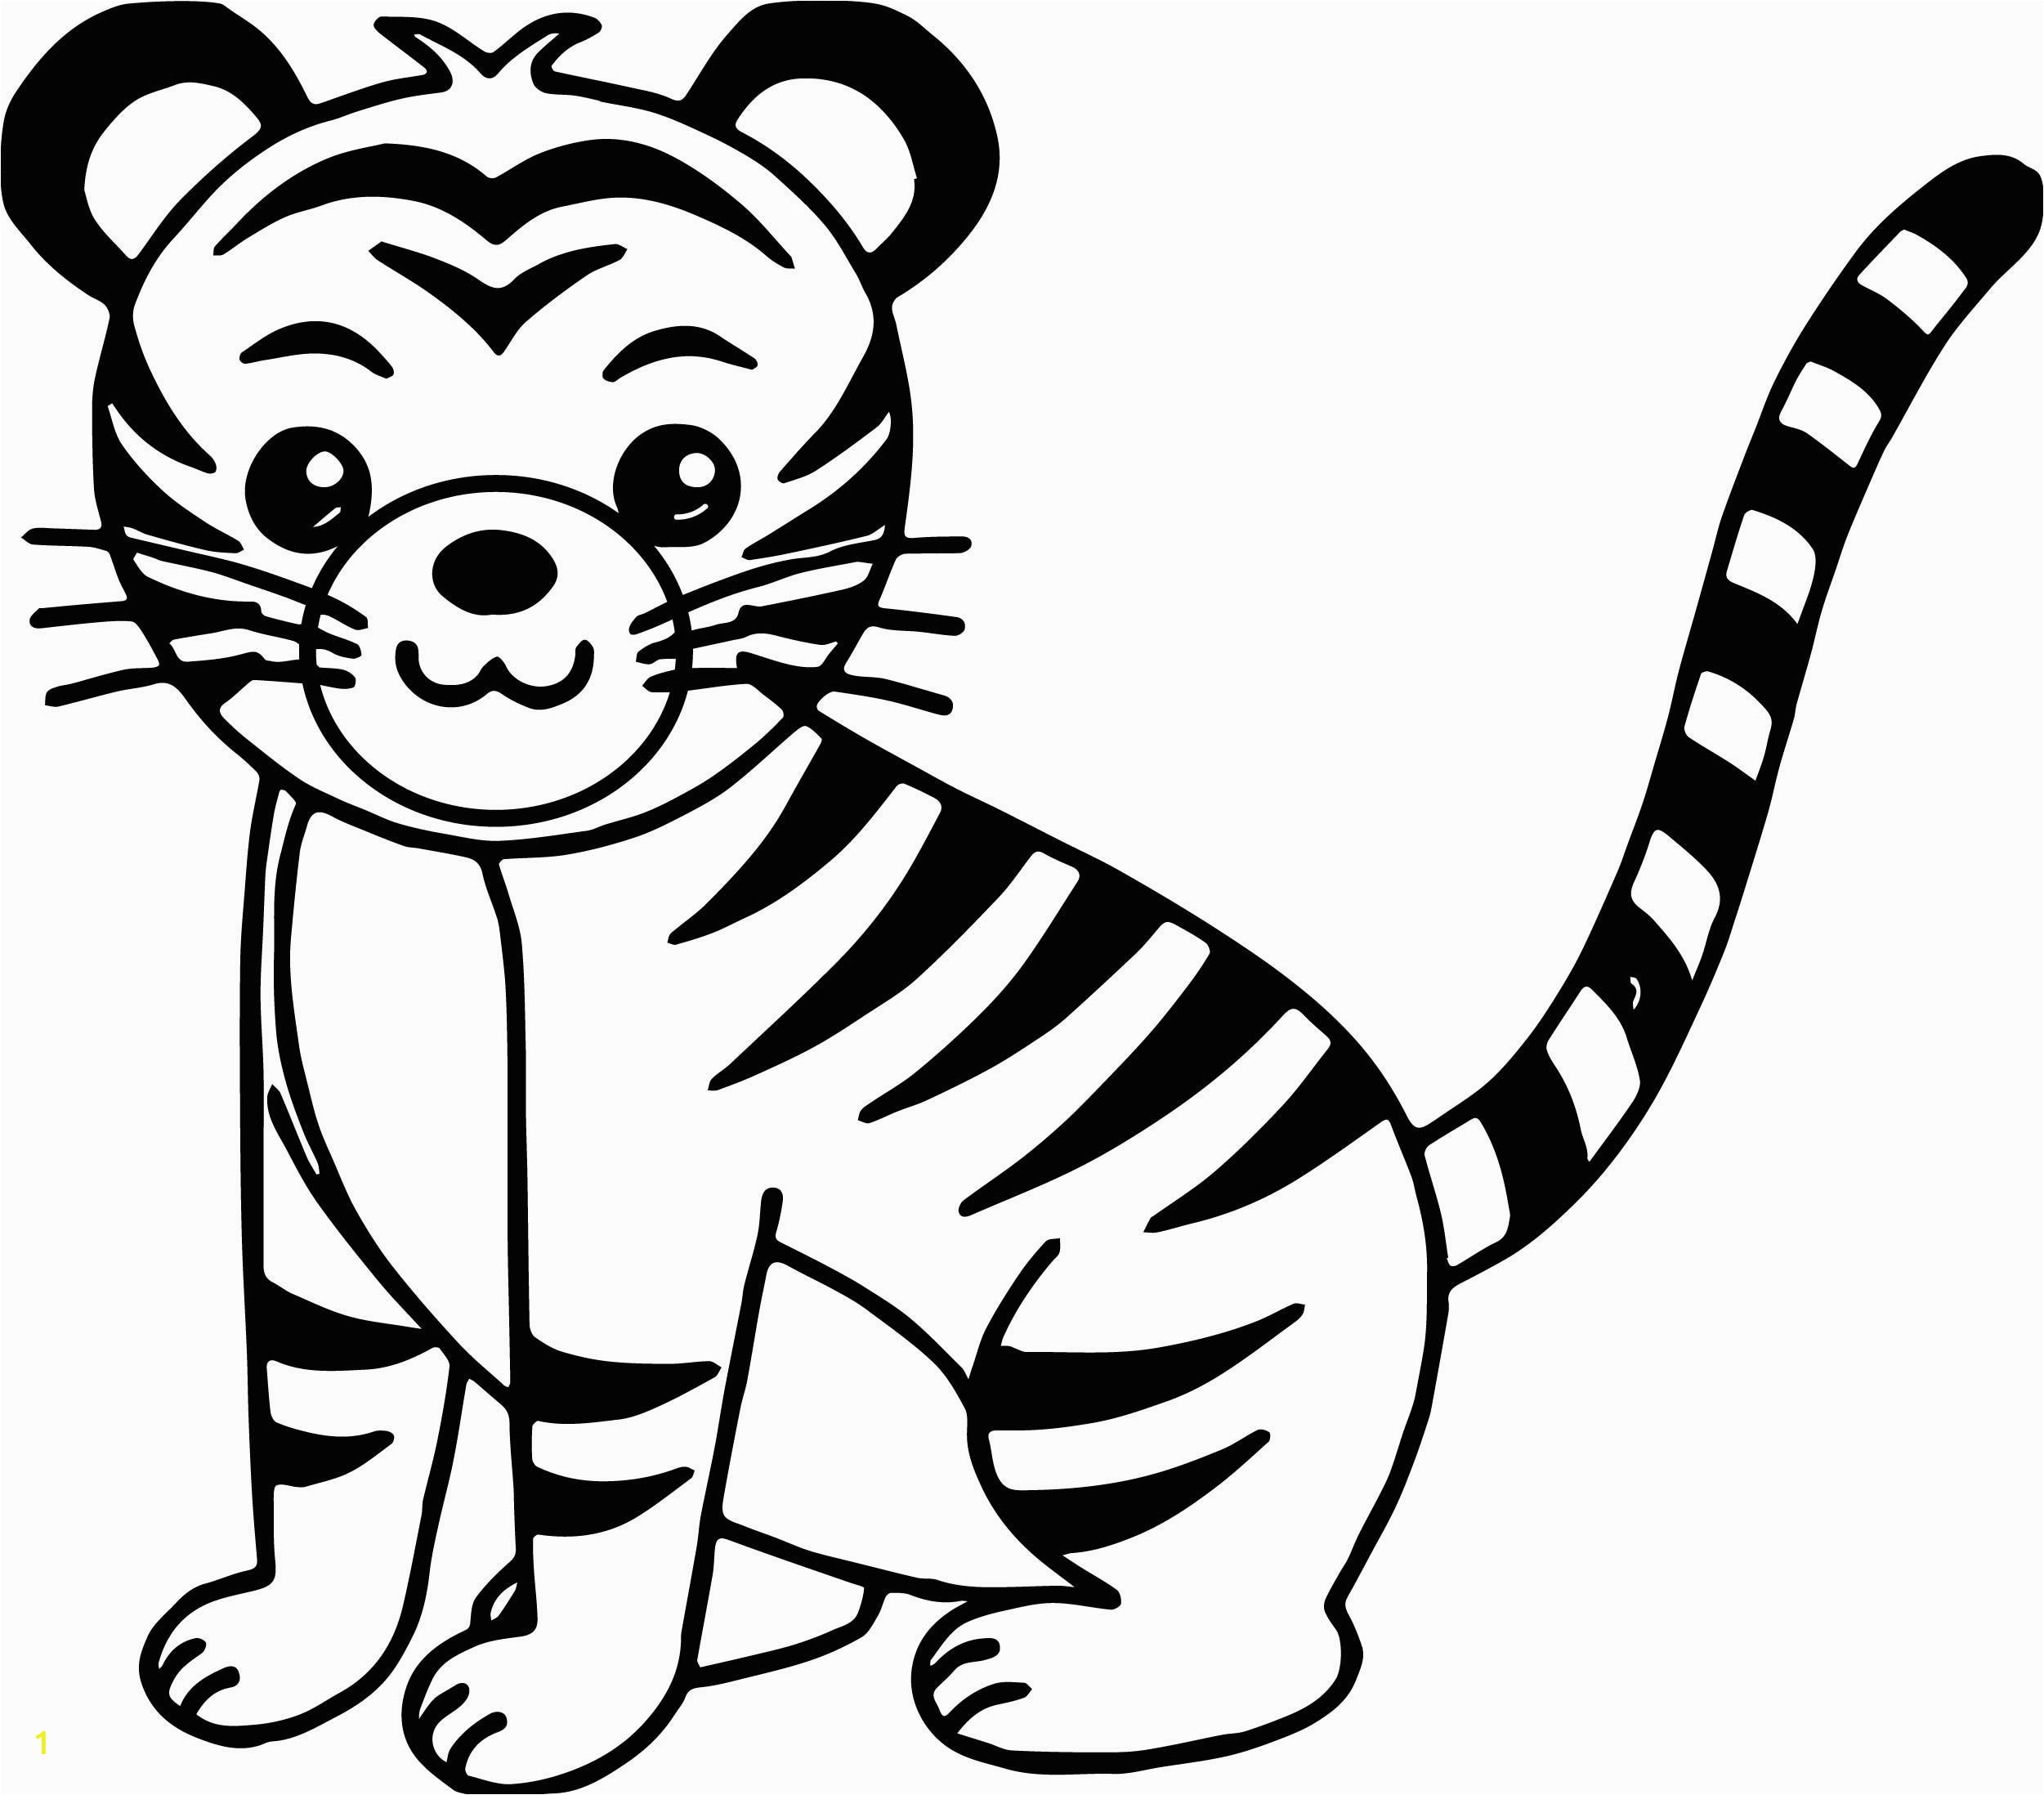 tiger coloring in pages fresh awesome cute cat tiger coloring page of tiger coloring in pages